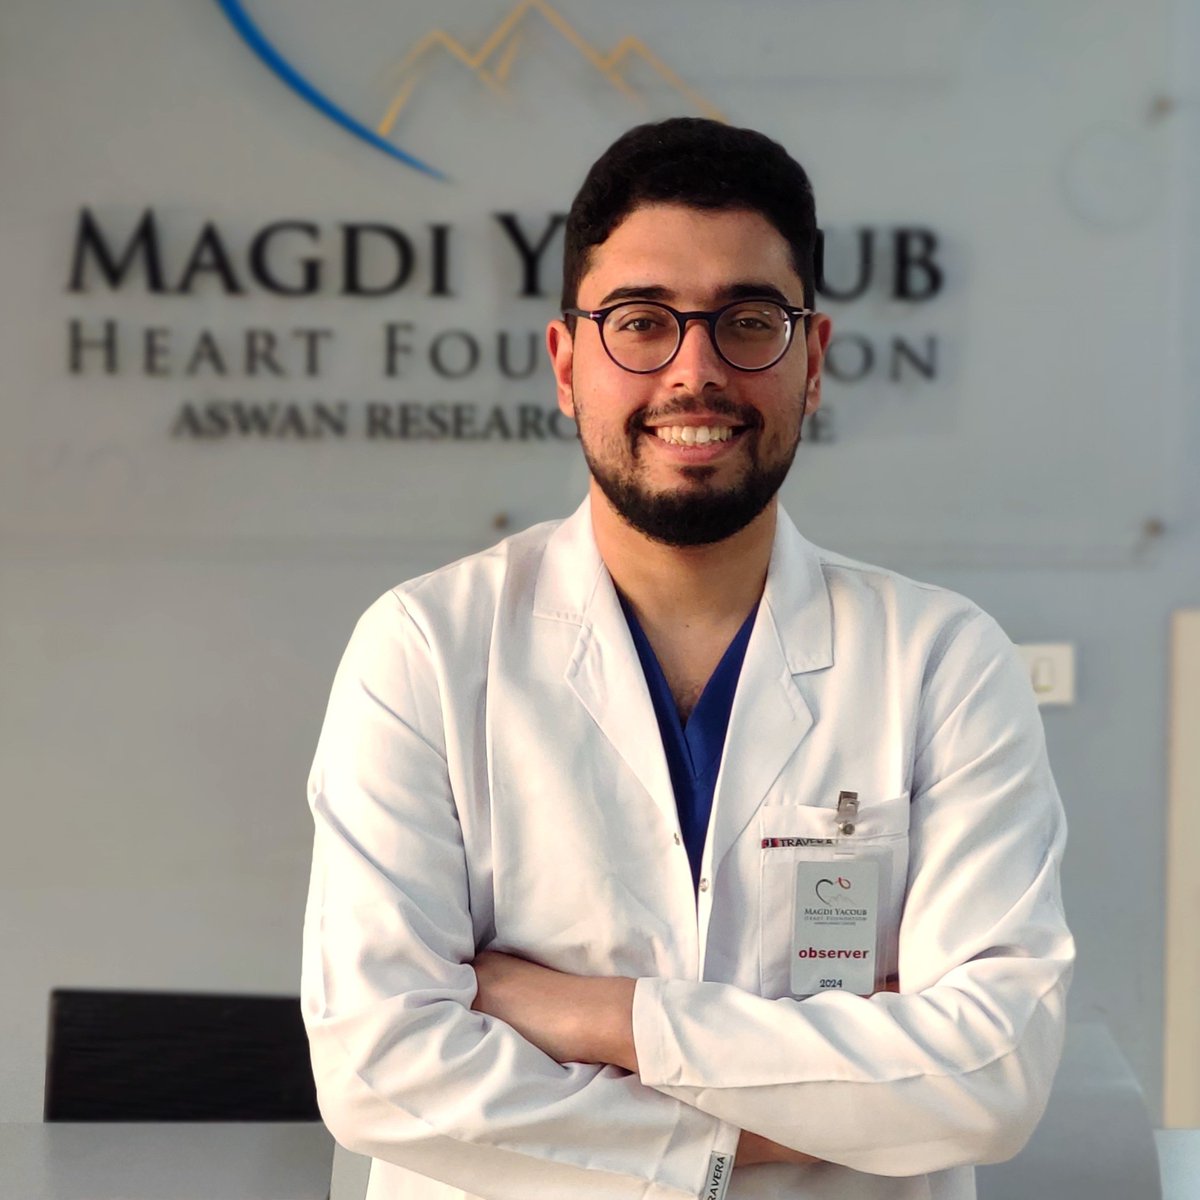 Hello #MedTwitter,
I'm Ahmed Yasser, a recent graduate from Egypt🇪🇬. 
I am actively looking for a research position in the US. I am available for more than a year as I am not applying for the next match cycle. 
Any help will be so appreciated.